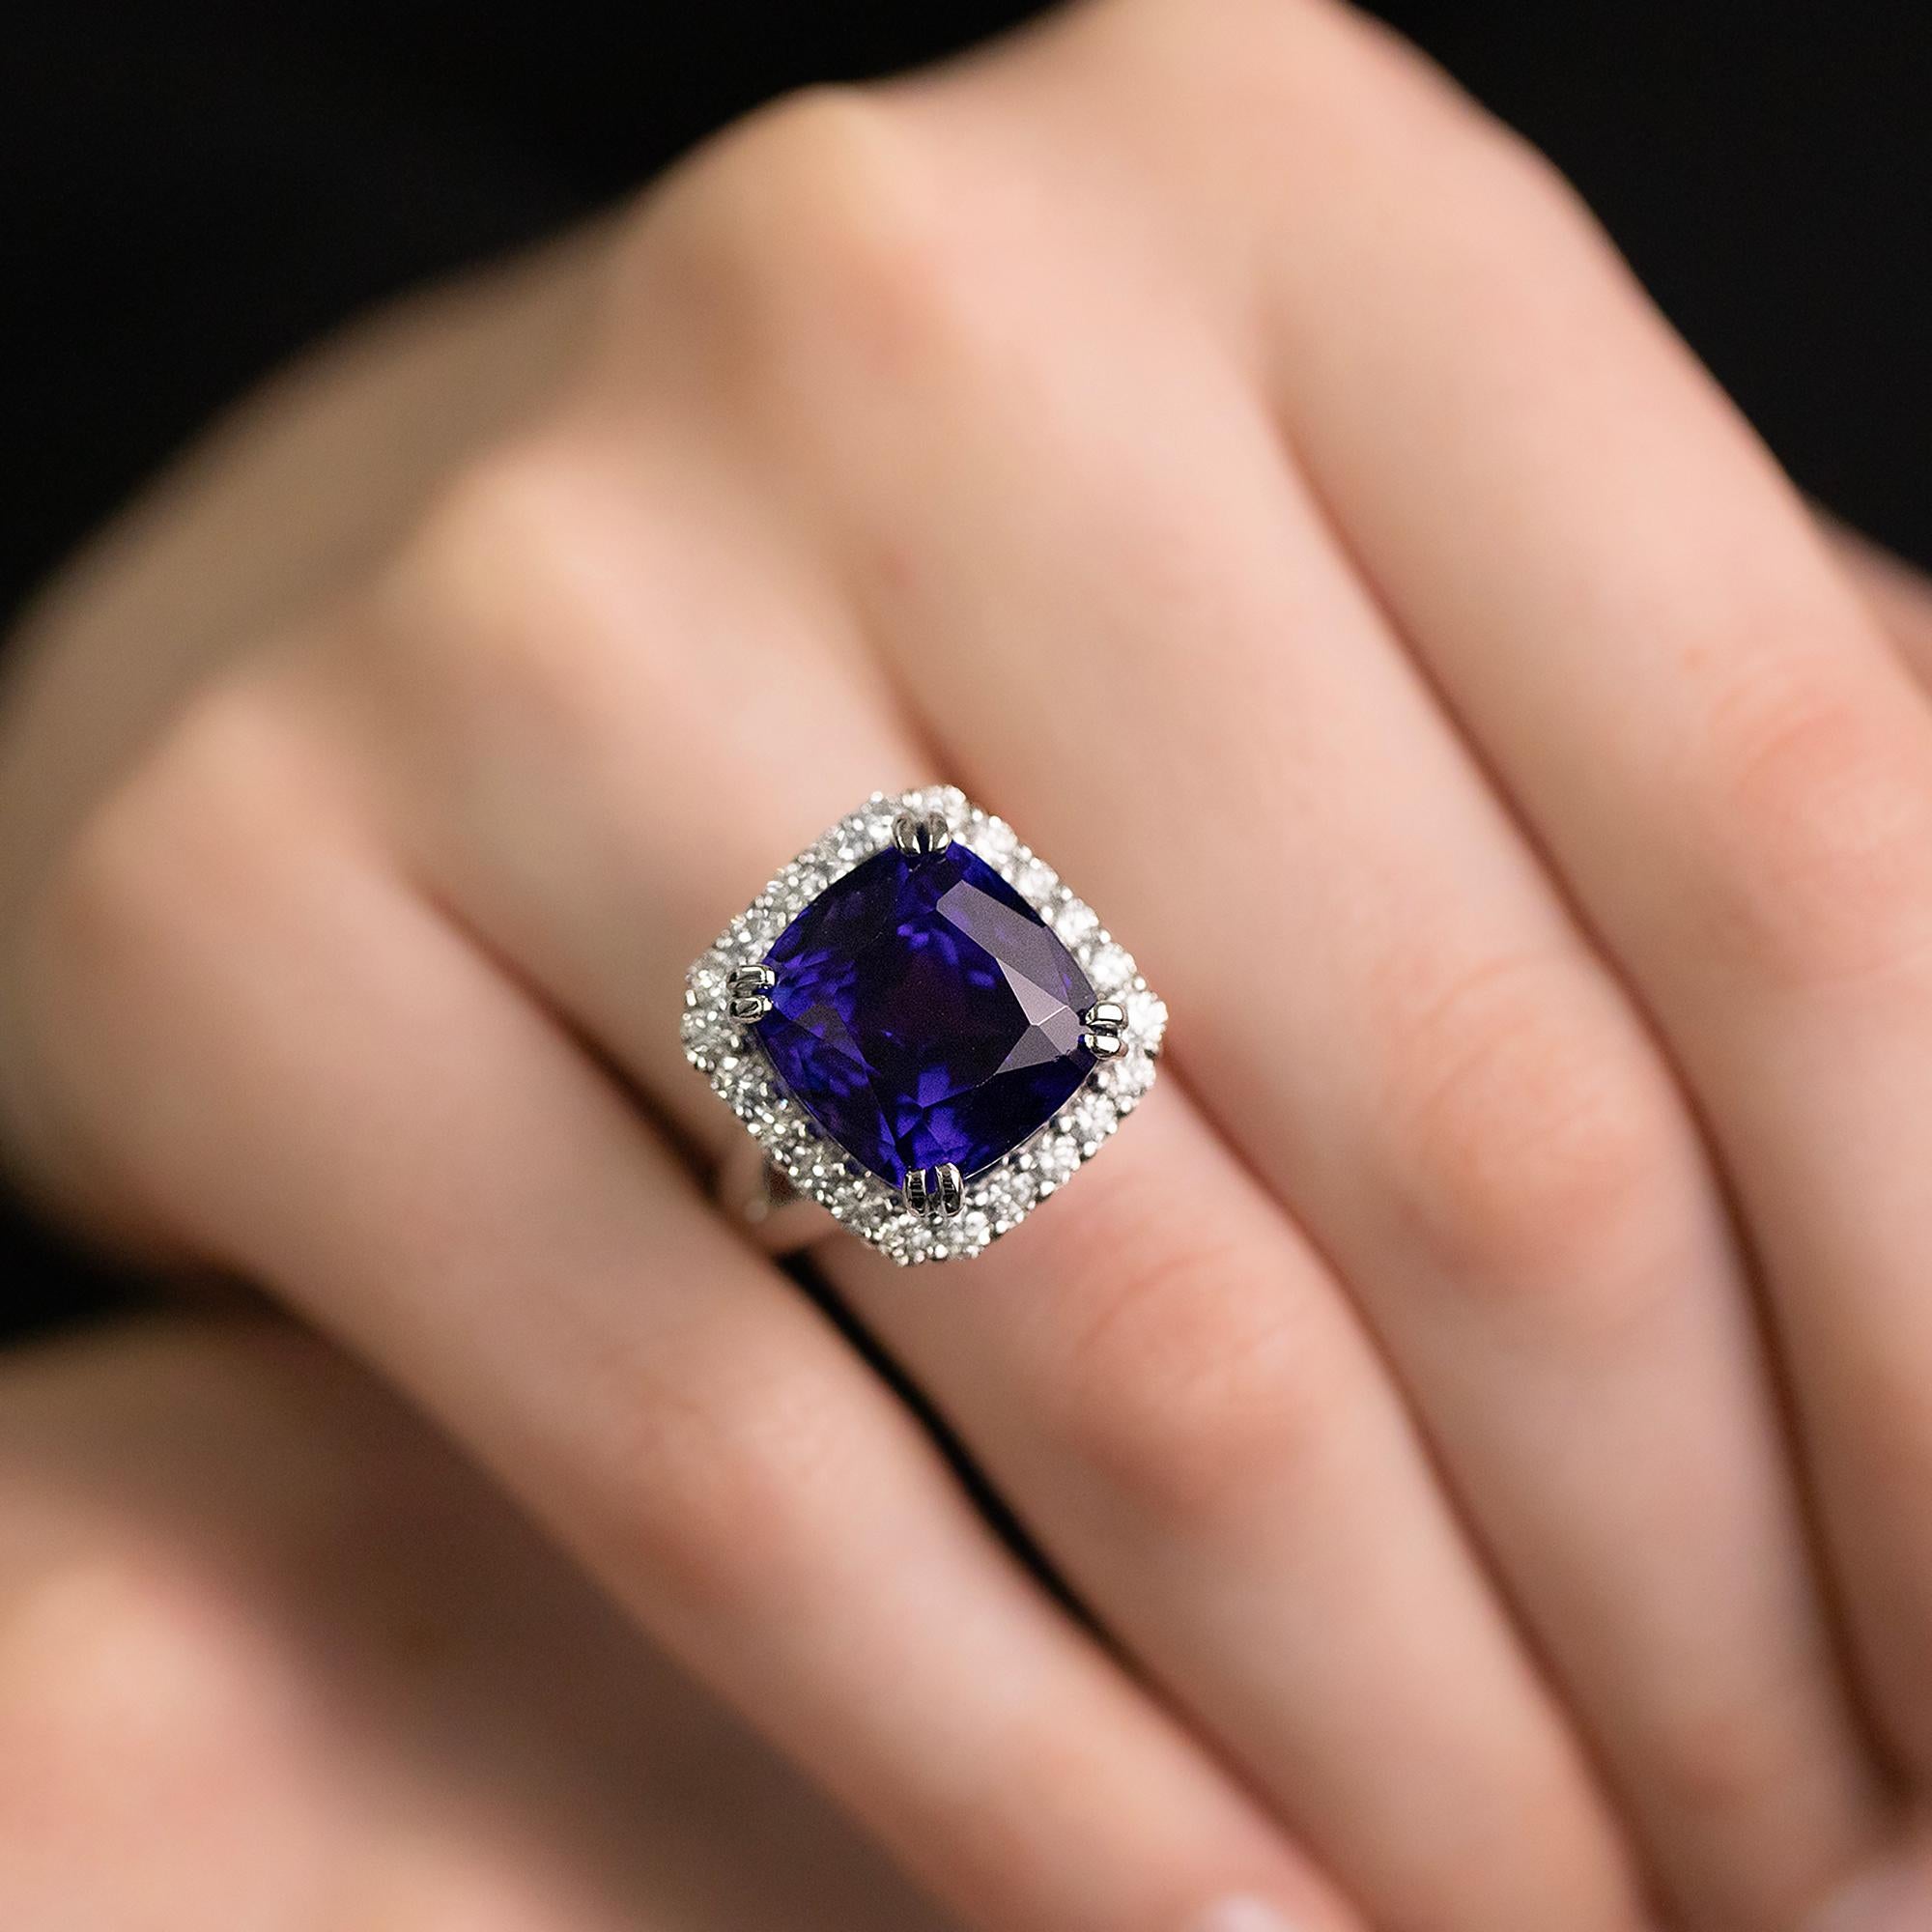 Deepest blue, deep from the Earth. An homage to the union between land and sky, the bold and the blue, under a crown of sparkling cloud, Kilimanjaro showcases the essence and rarity of tanzanite gemstones. 
A symbol of vitality, intuition, and new